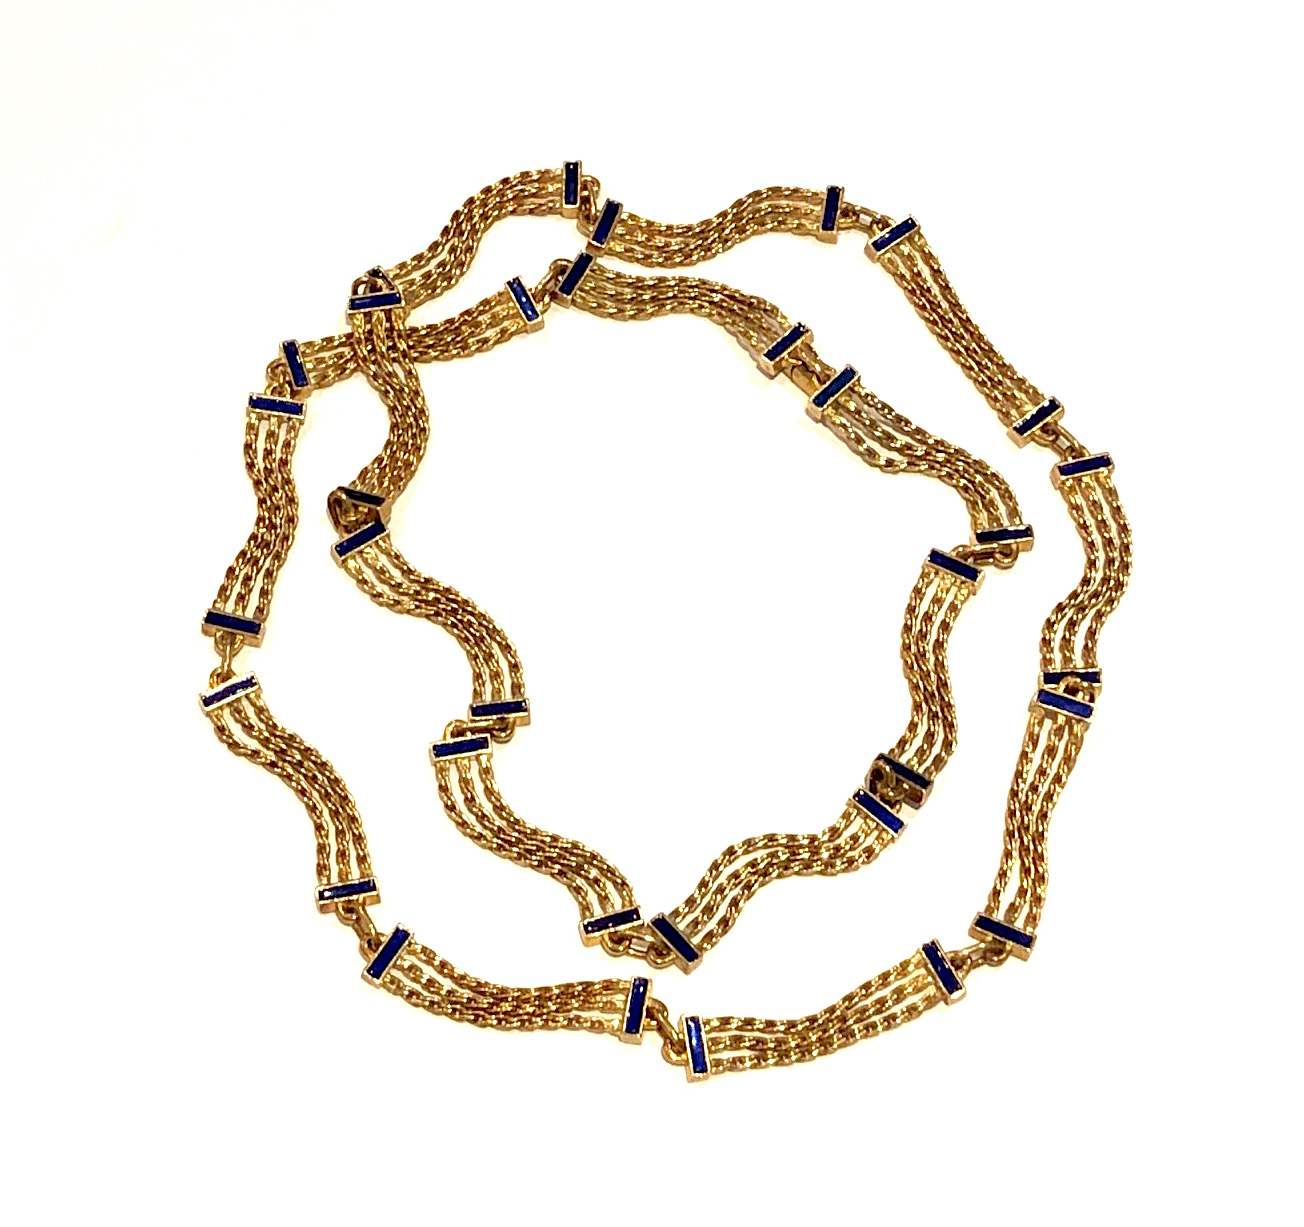 Cartier London, long and partitioned 18k gold link chain with cobalt blue enamel panel details, signed: Cartier, London (script signature), 750 in a diamond for 18K gold, French maker’s touchmark, no.P4450, Length: 36½ inches, c.1950’s